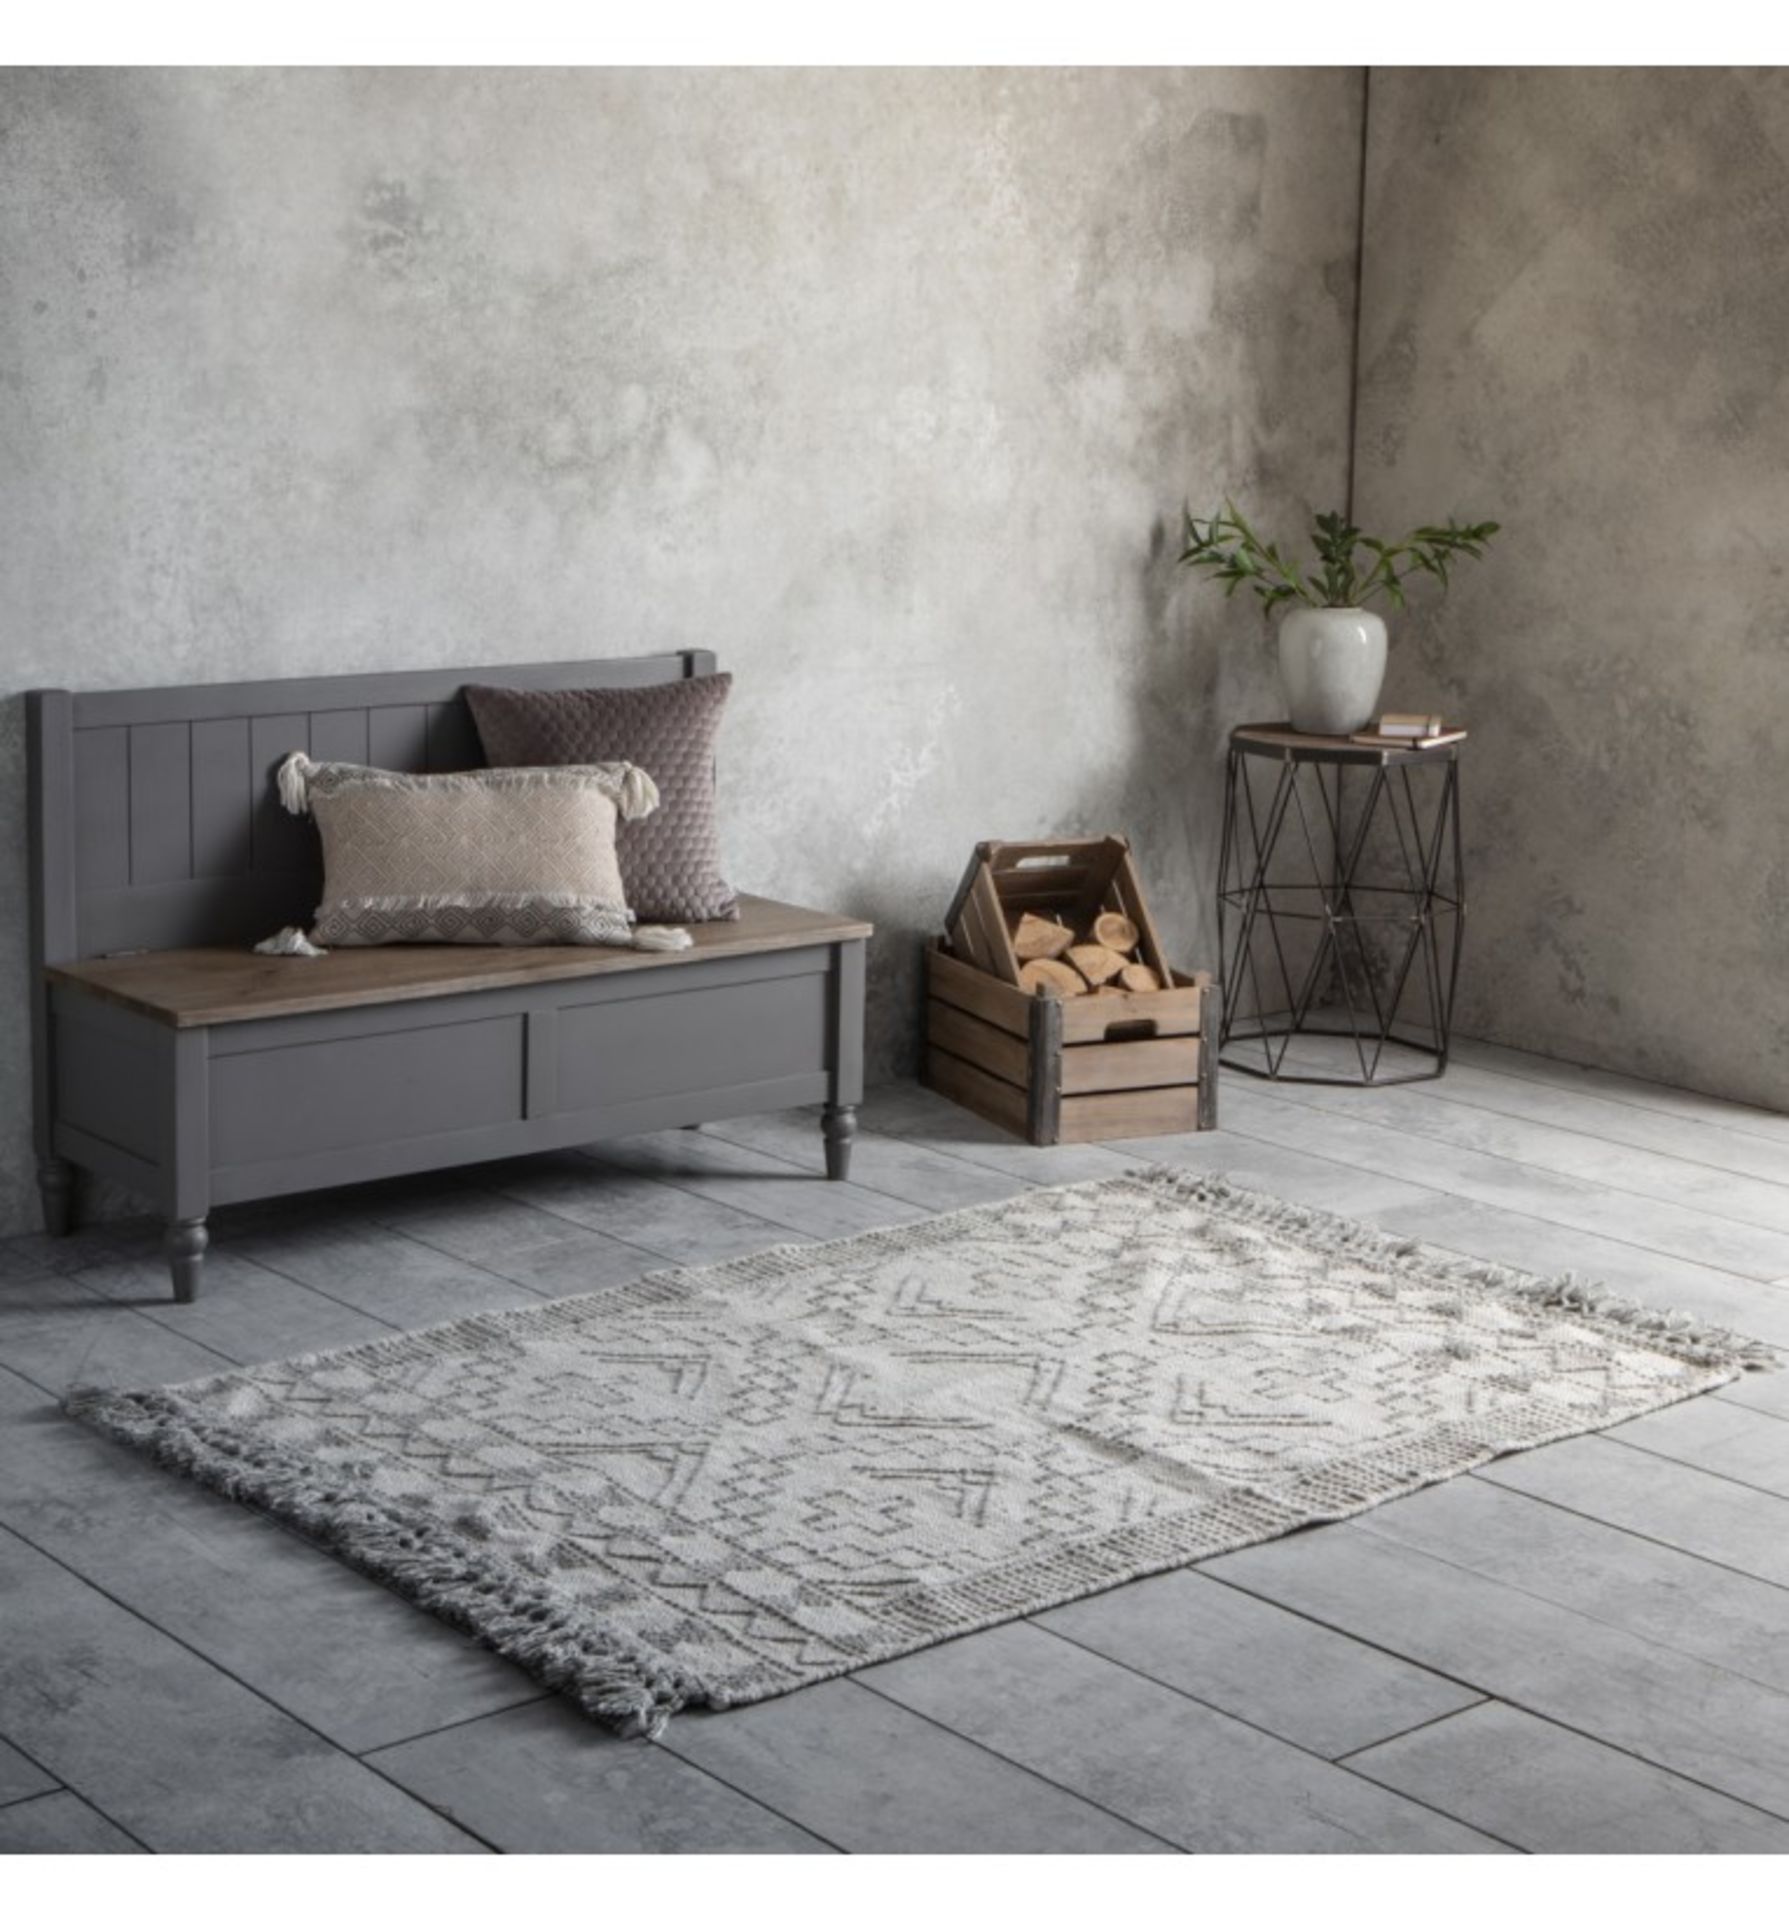 Peru Rug The lightweight pile comes in a neutral cream and grey colour scheme which makes it perfect